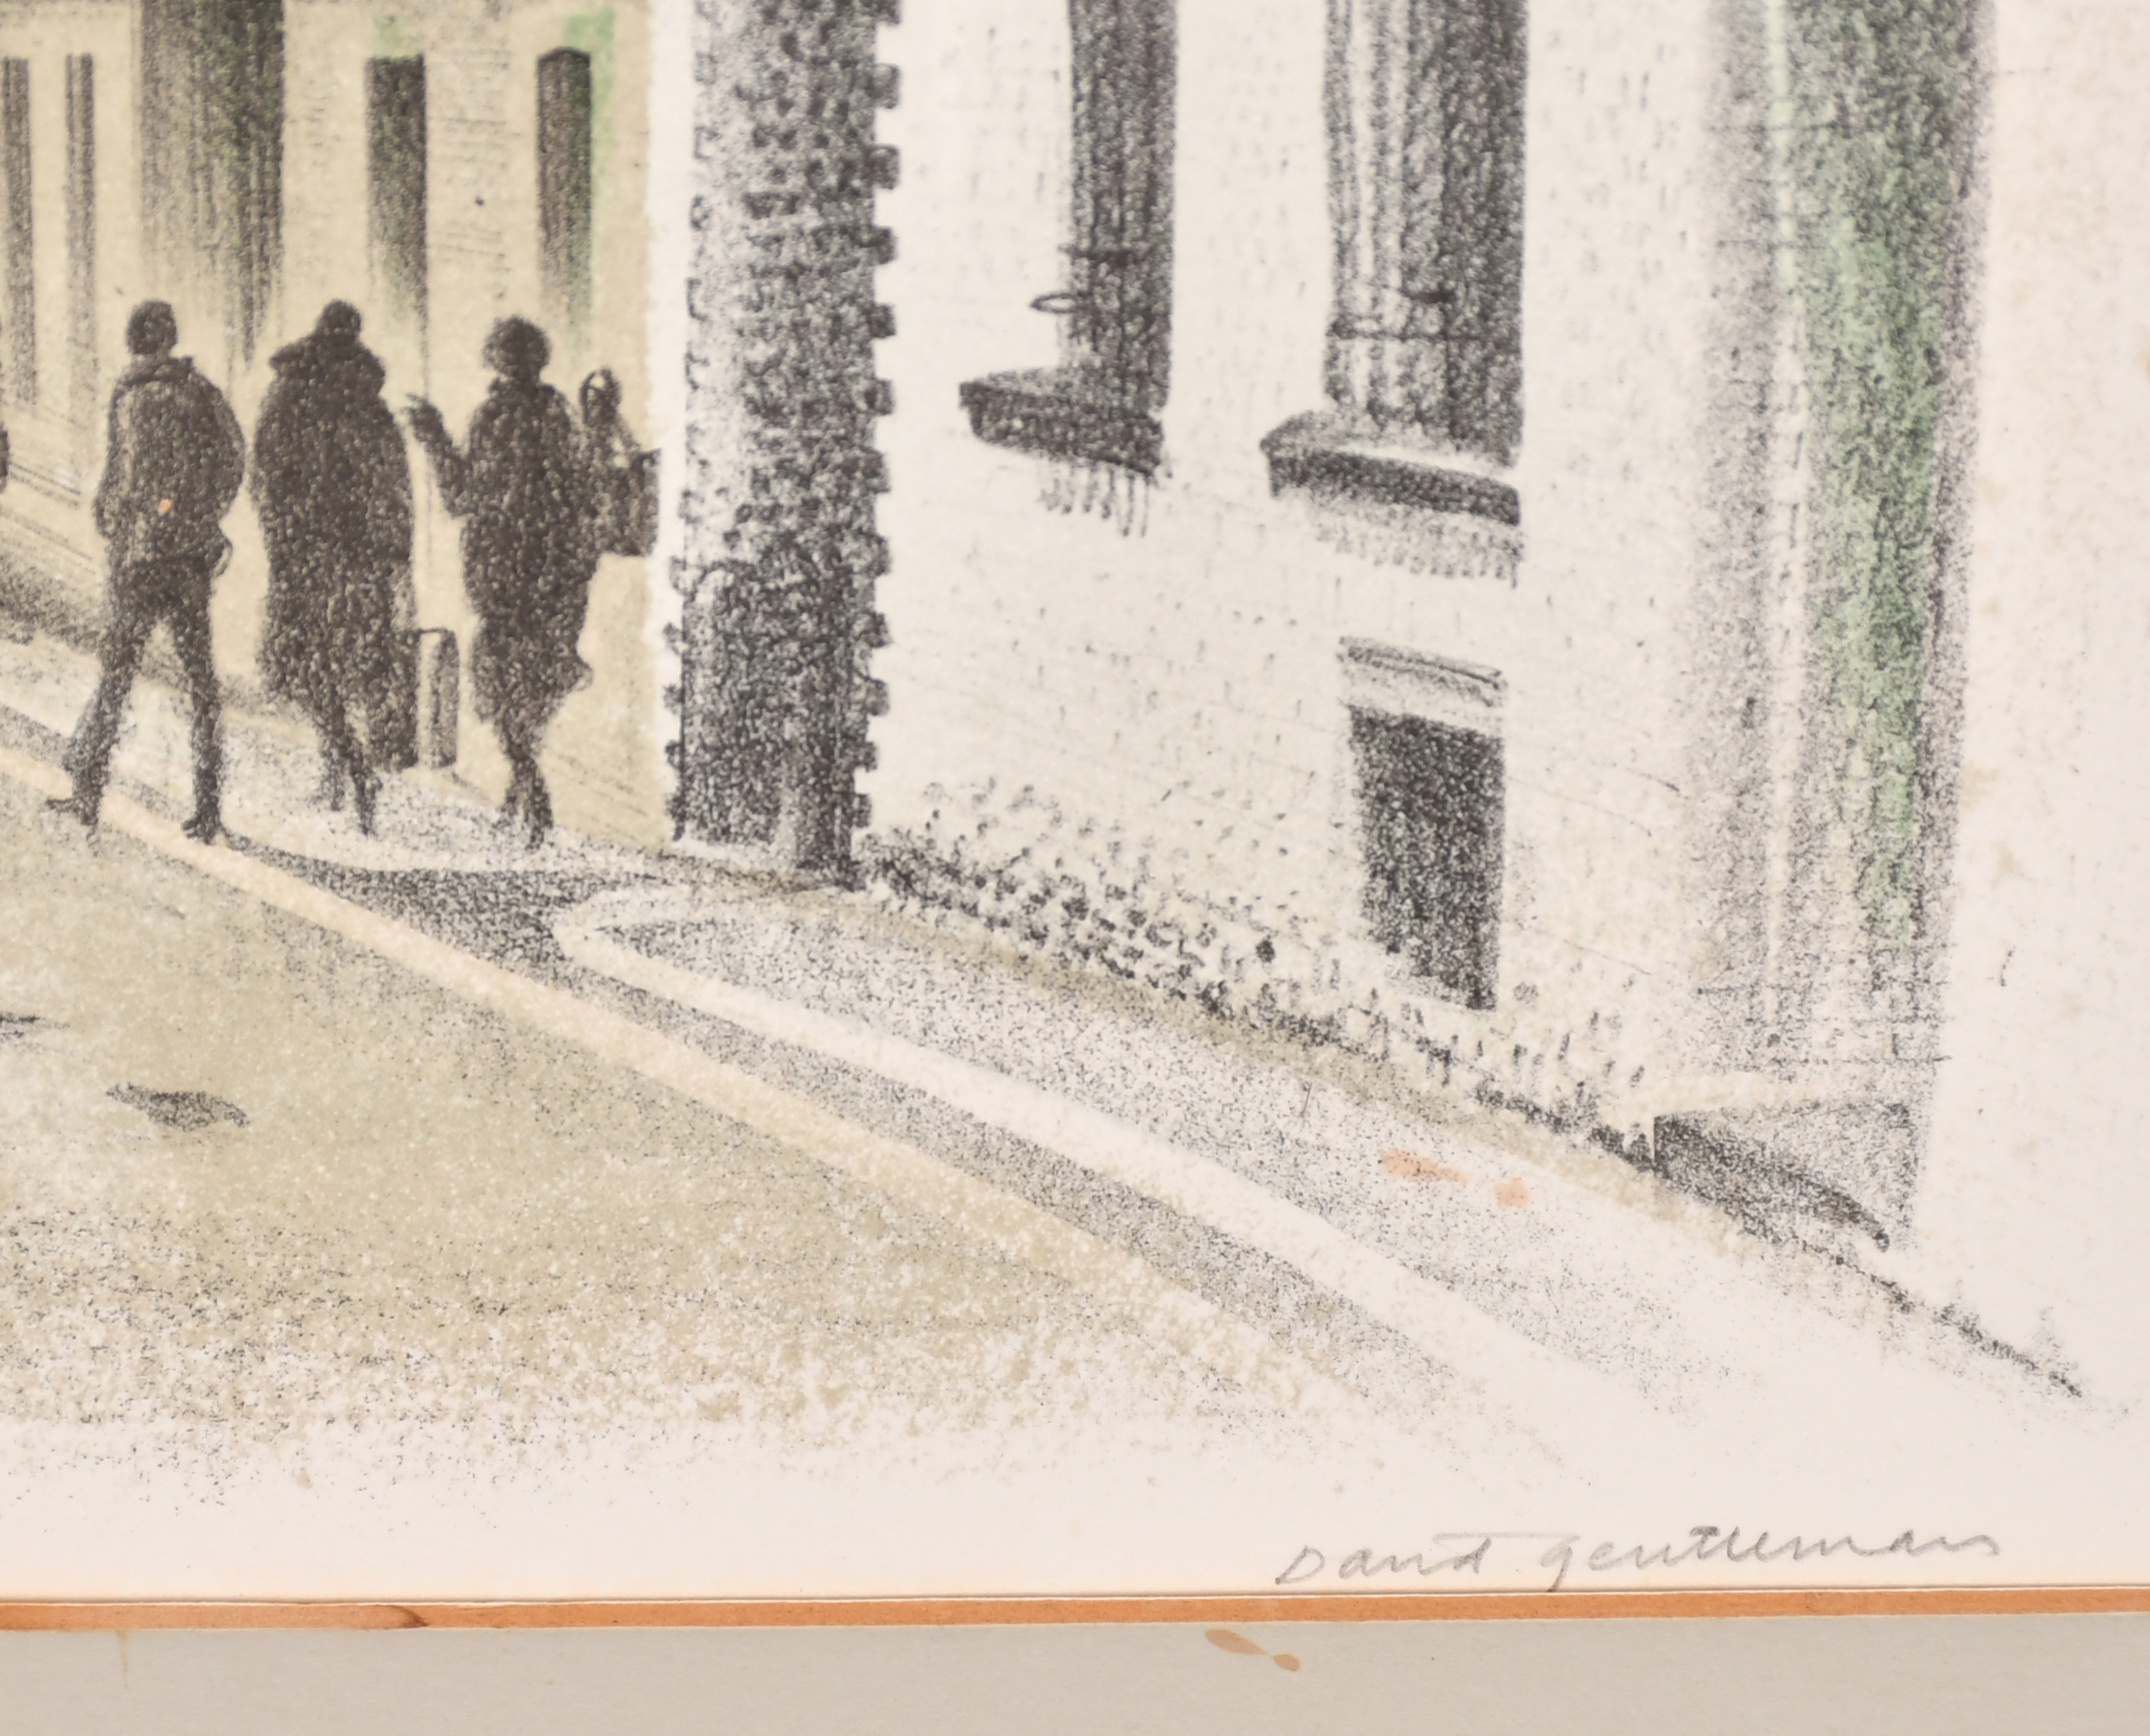 David Gentleman (1930-) British. "Langley Street", Lithograph, Signed and numbered 93/120 in pencil, - Image 3 of 5